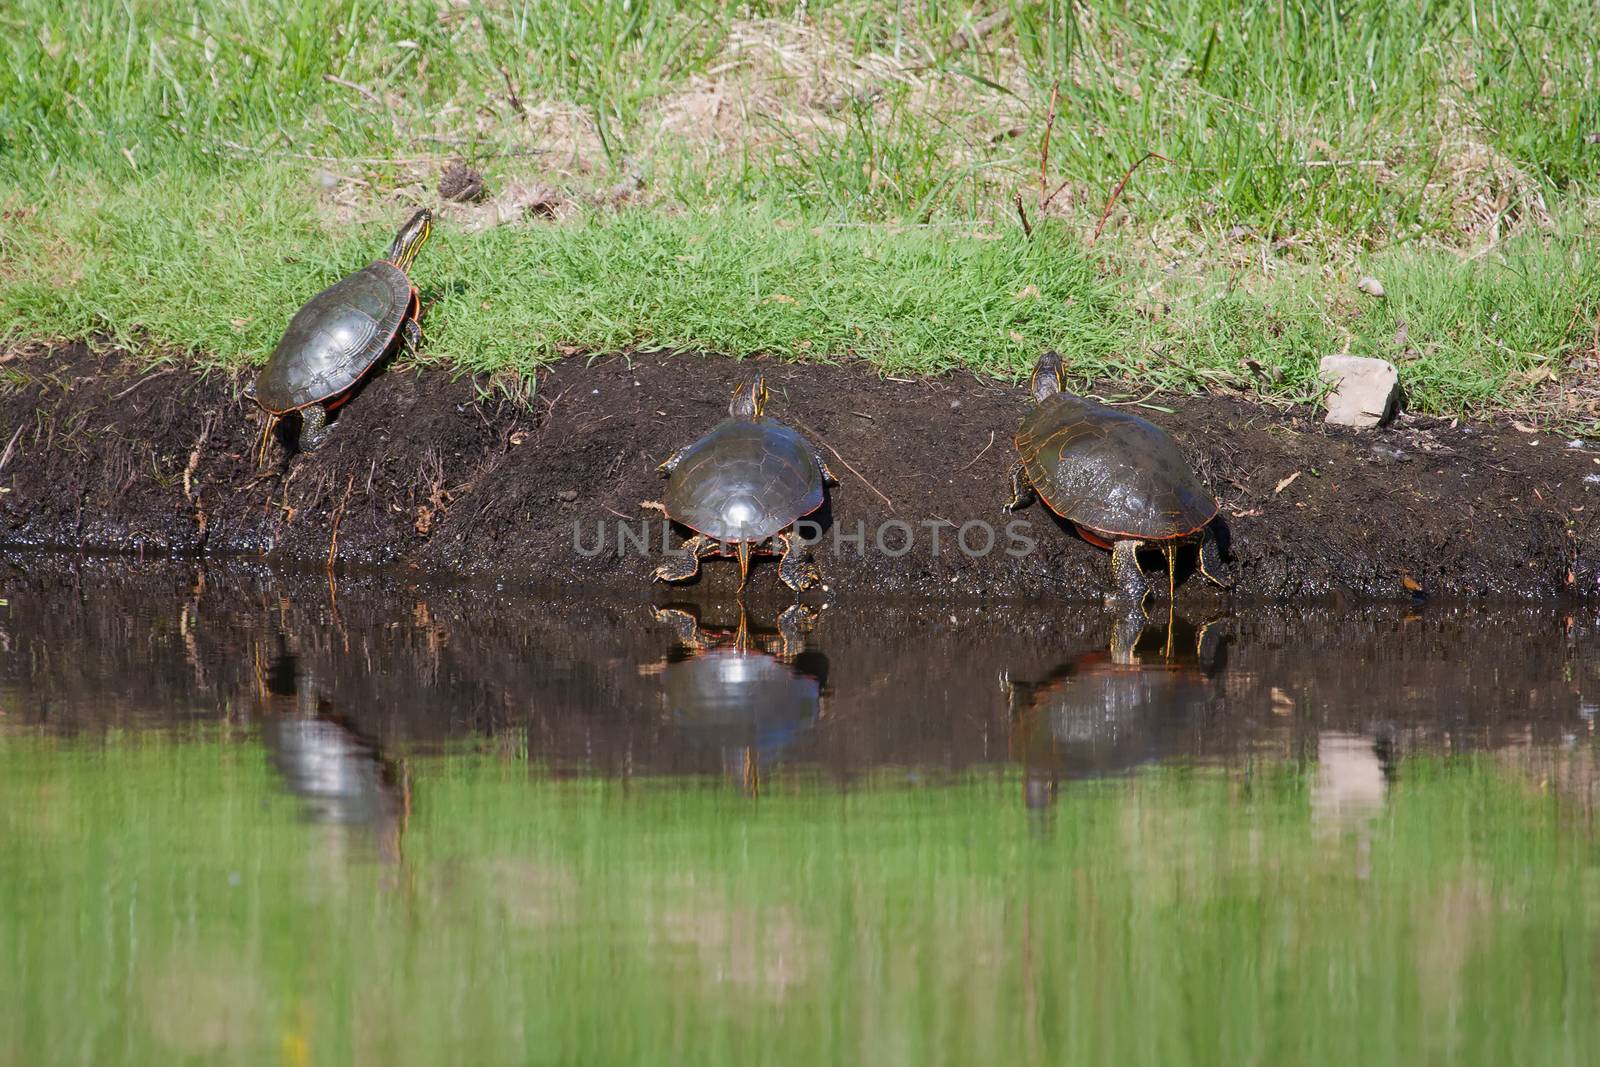 Painted Turtles by Coffee999